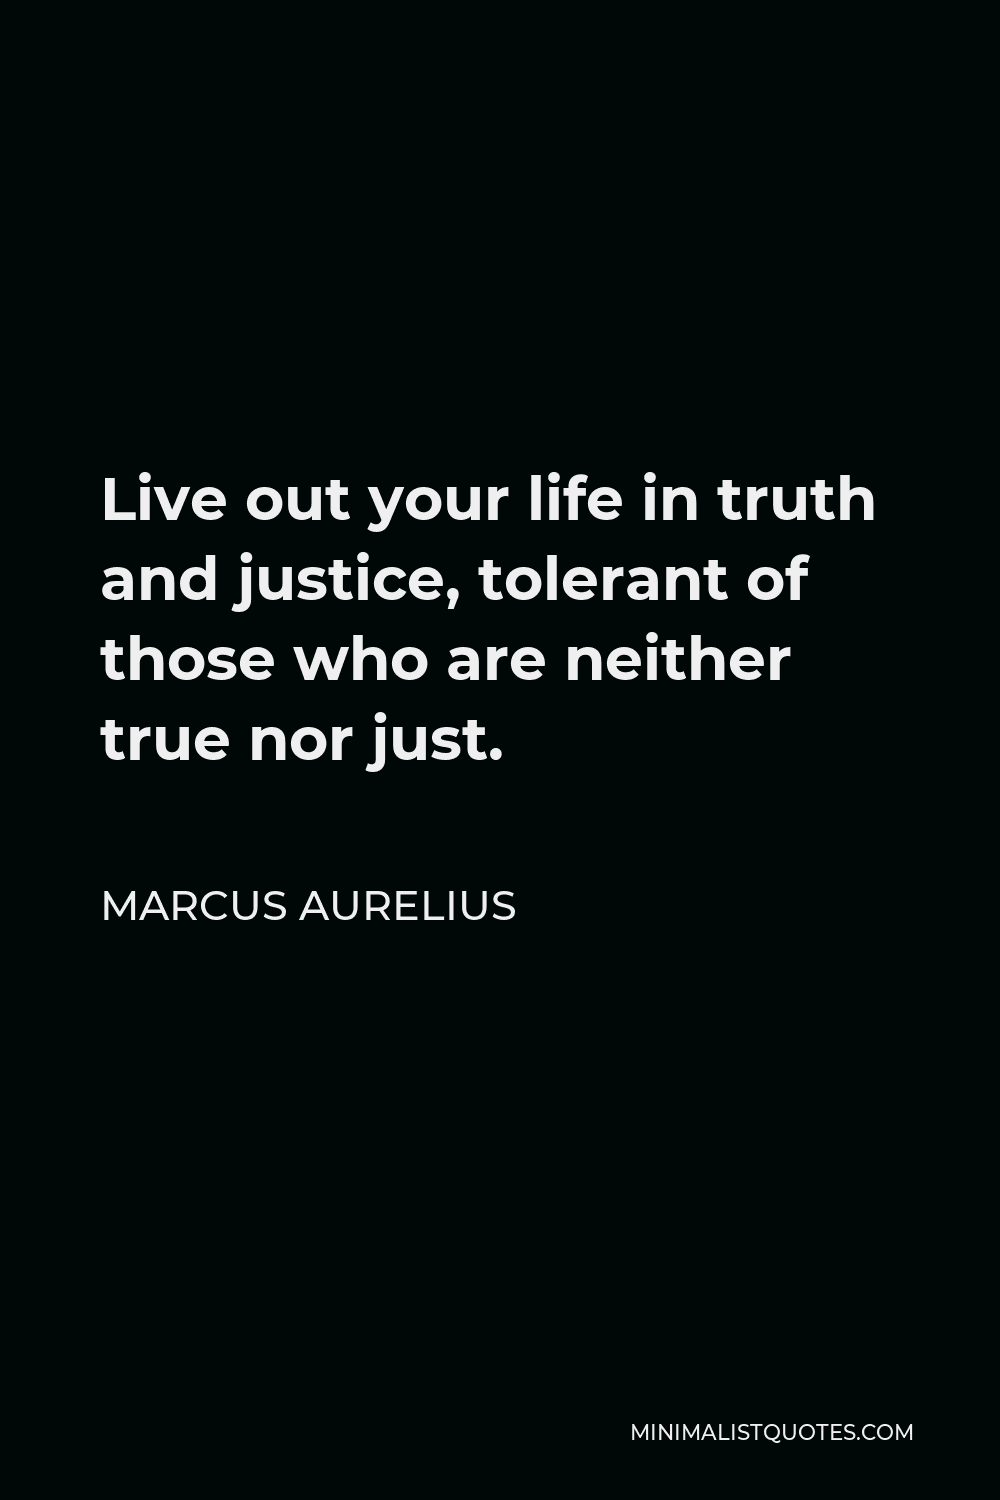 Marcus Aurelius Quote - Live out your life in truth and justice, tolerant of those who are neither true nor just.